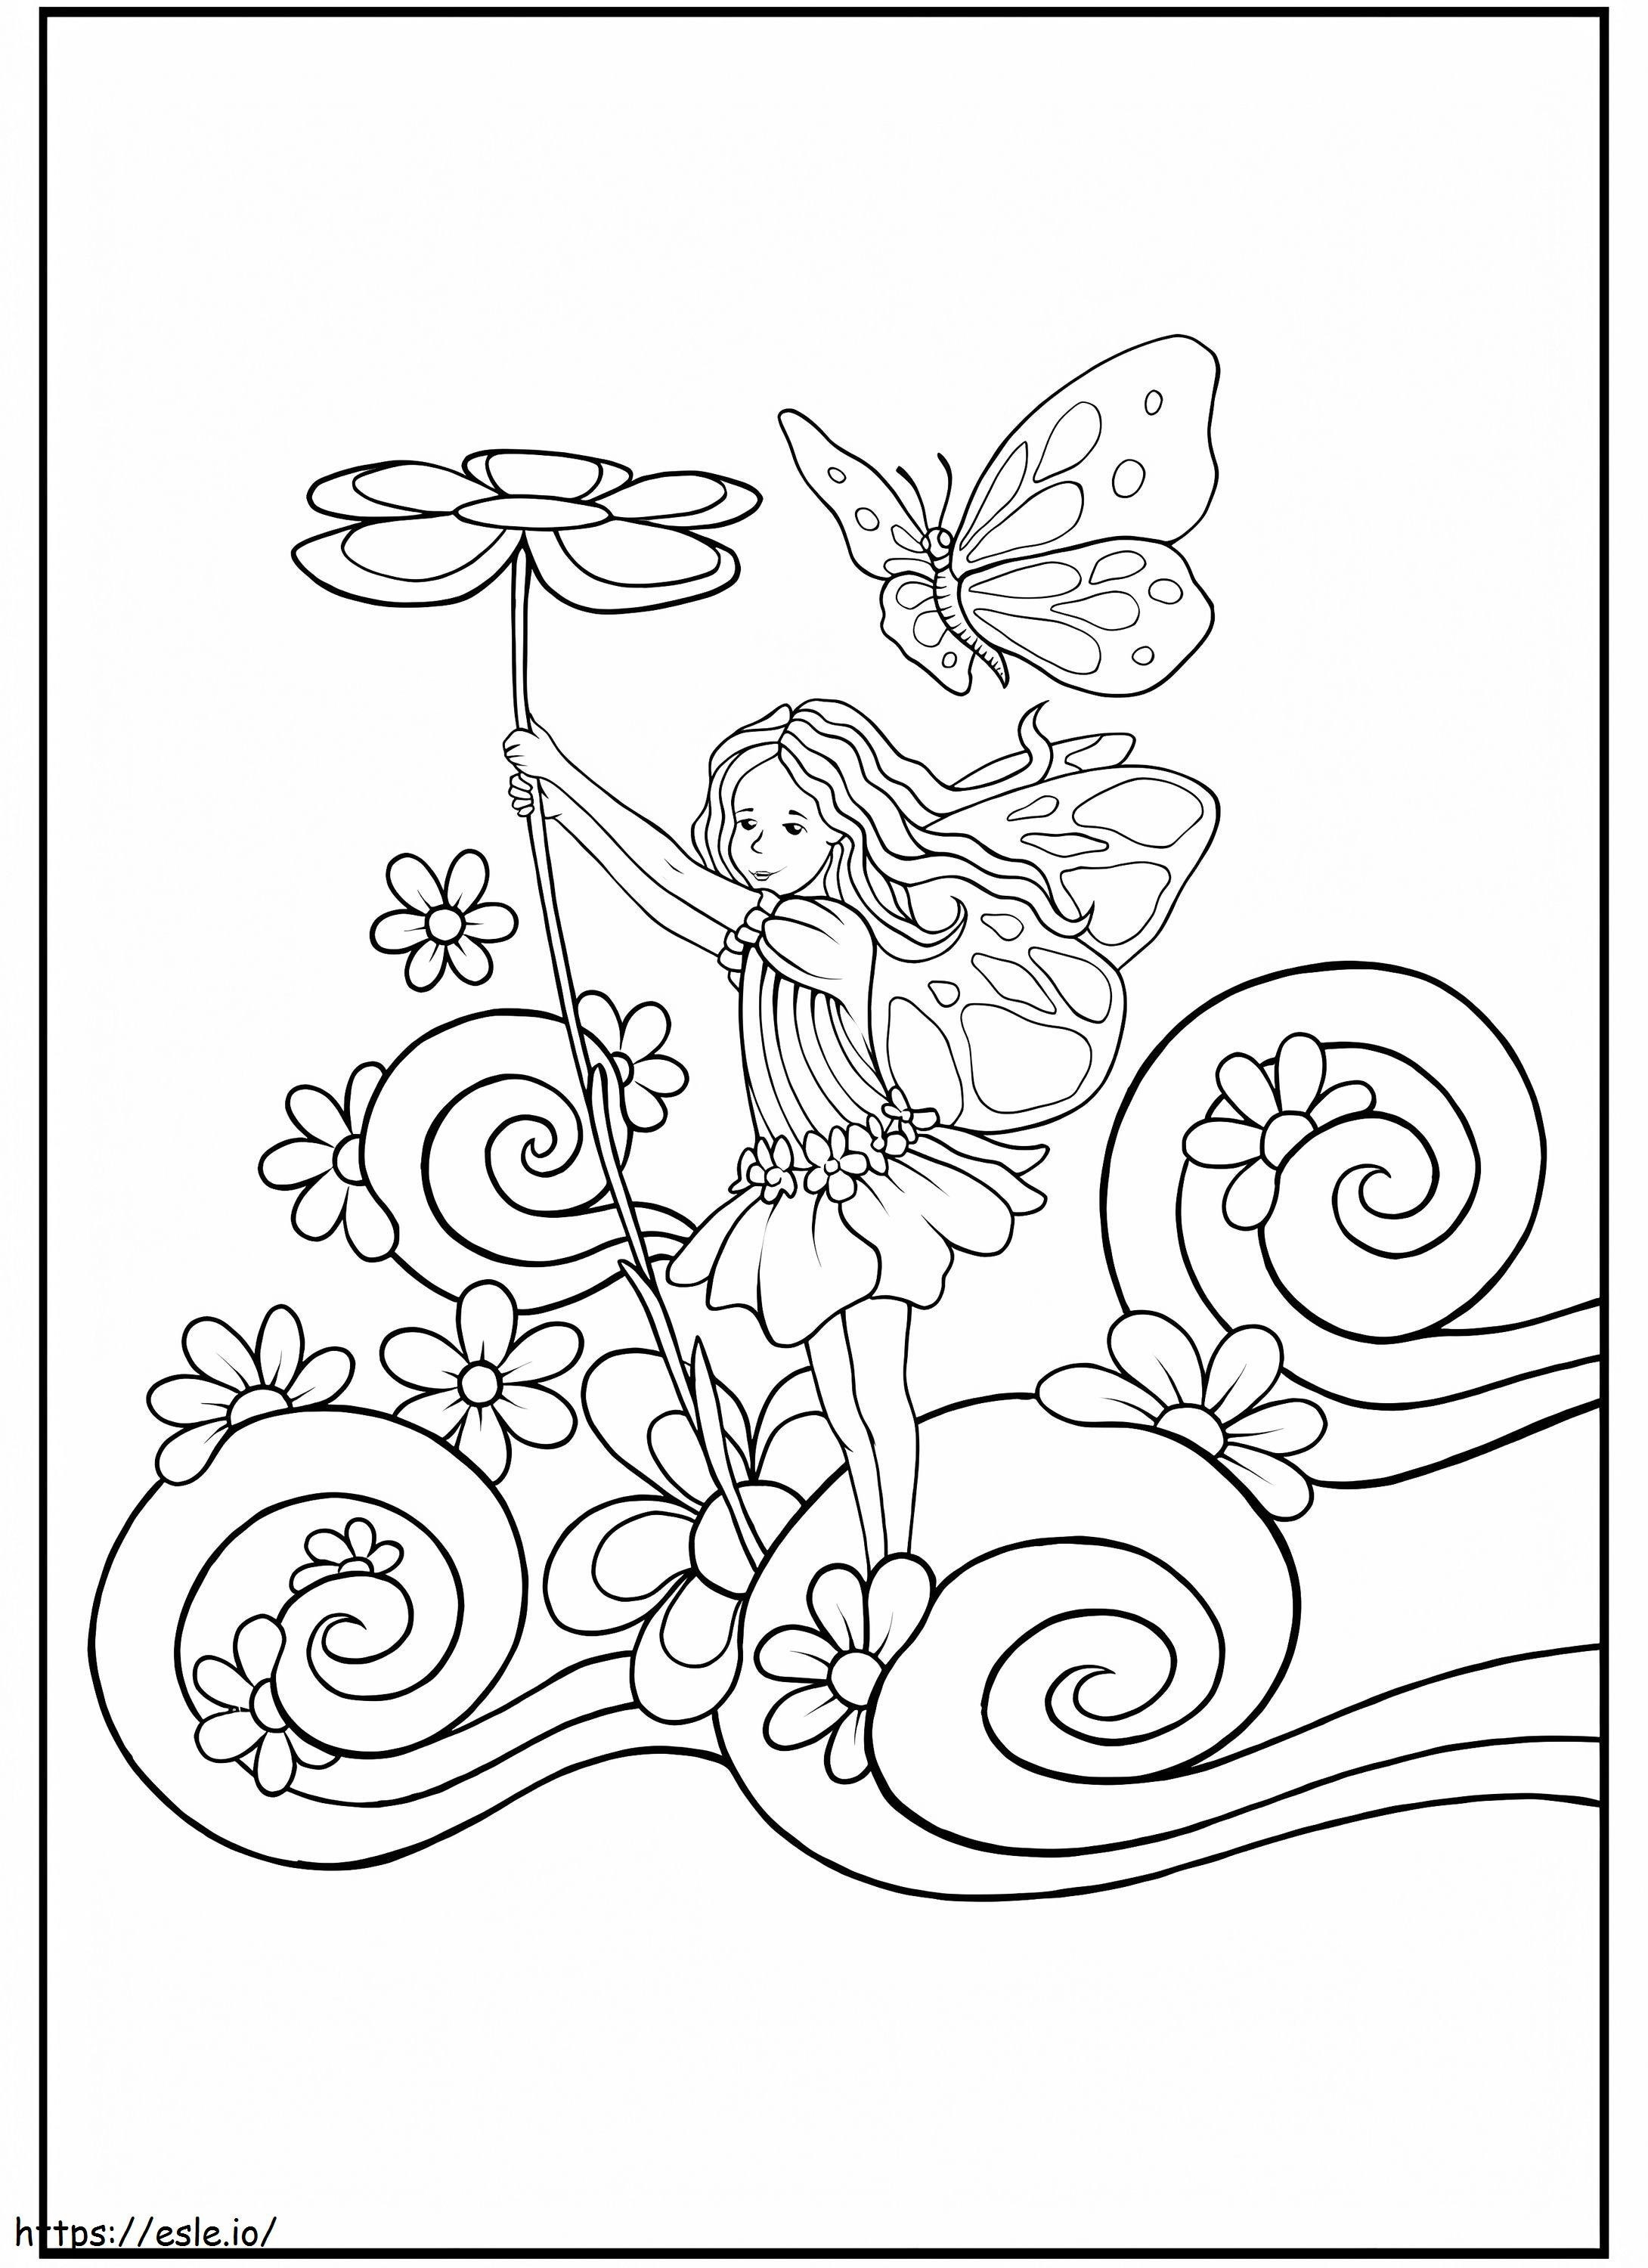 1587375522 Untitledpo coloring page